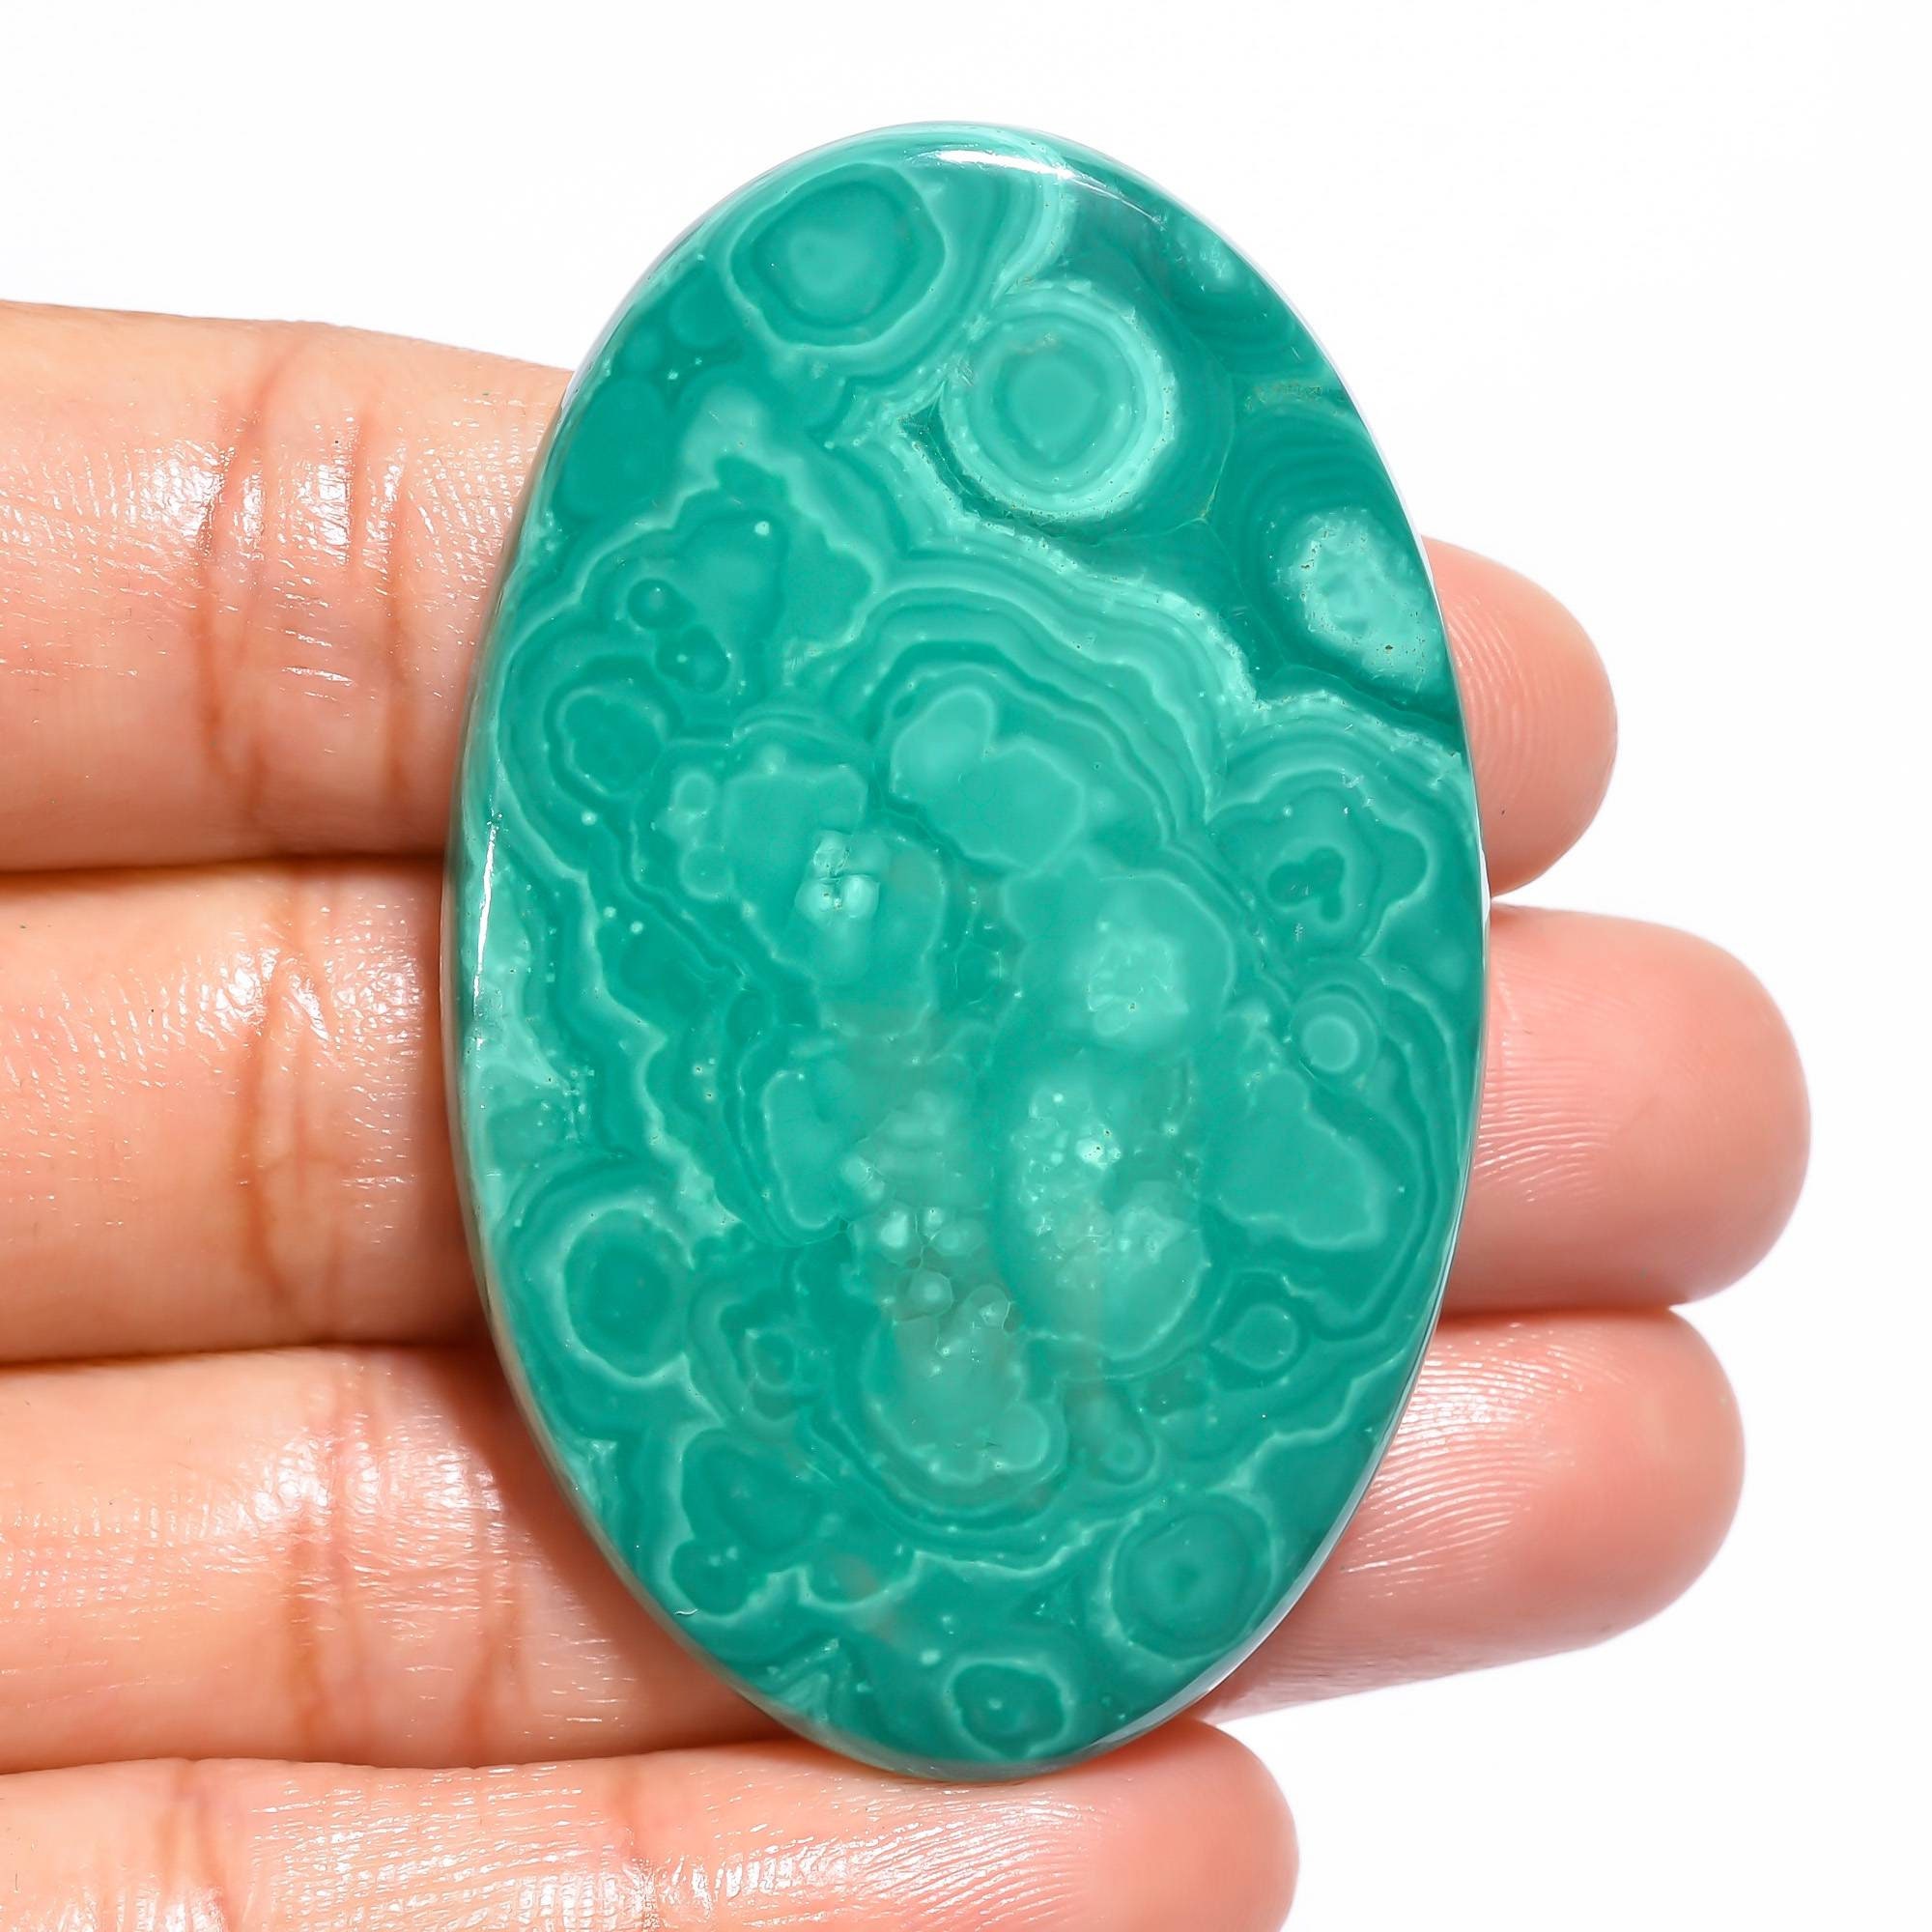 Dazzling Top Quality 100% Natural Malachite Oval Shape Cabochon Loose Gemstone For Making Jewelry 70.55 Ct 41x25x5 MM RJ-780